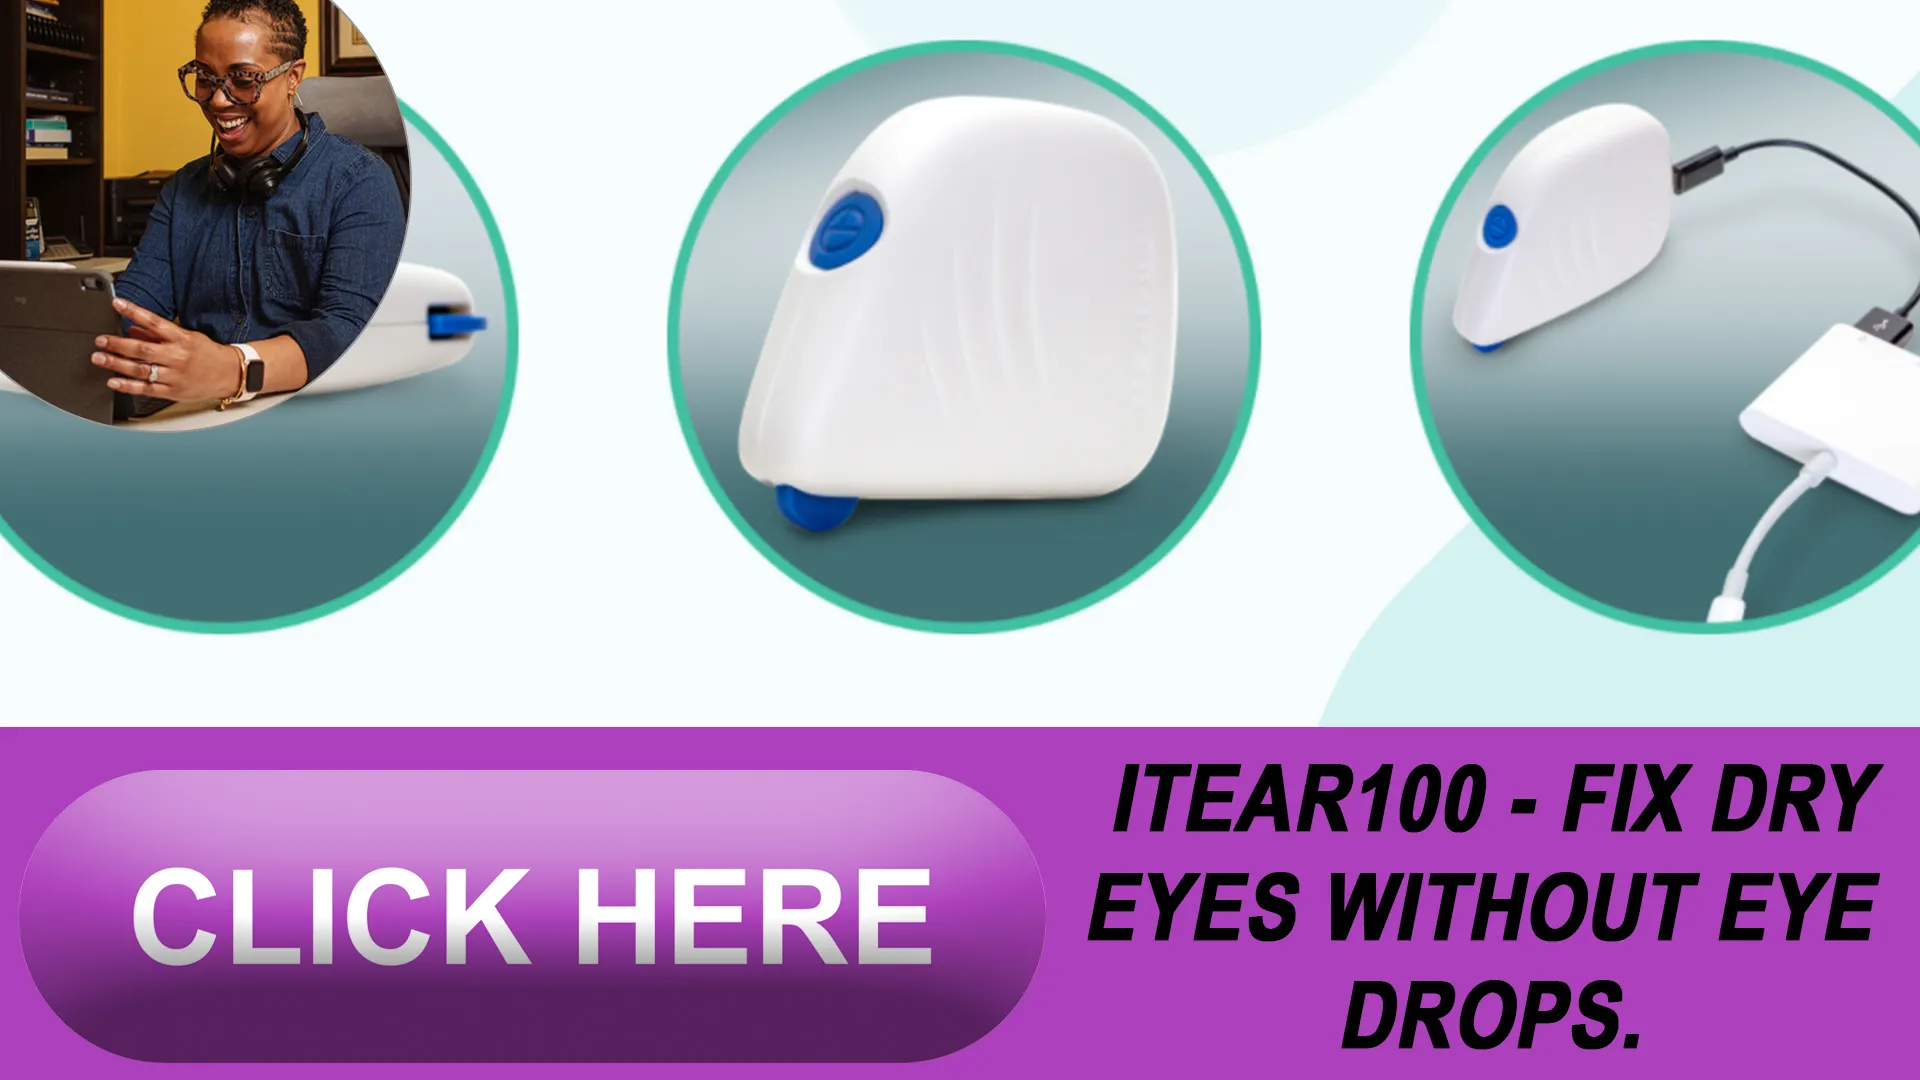 Experience the Instantaneous Relief Offered by iTear100